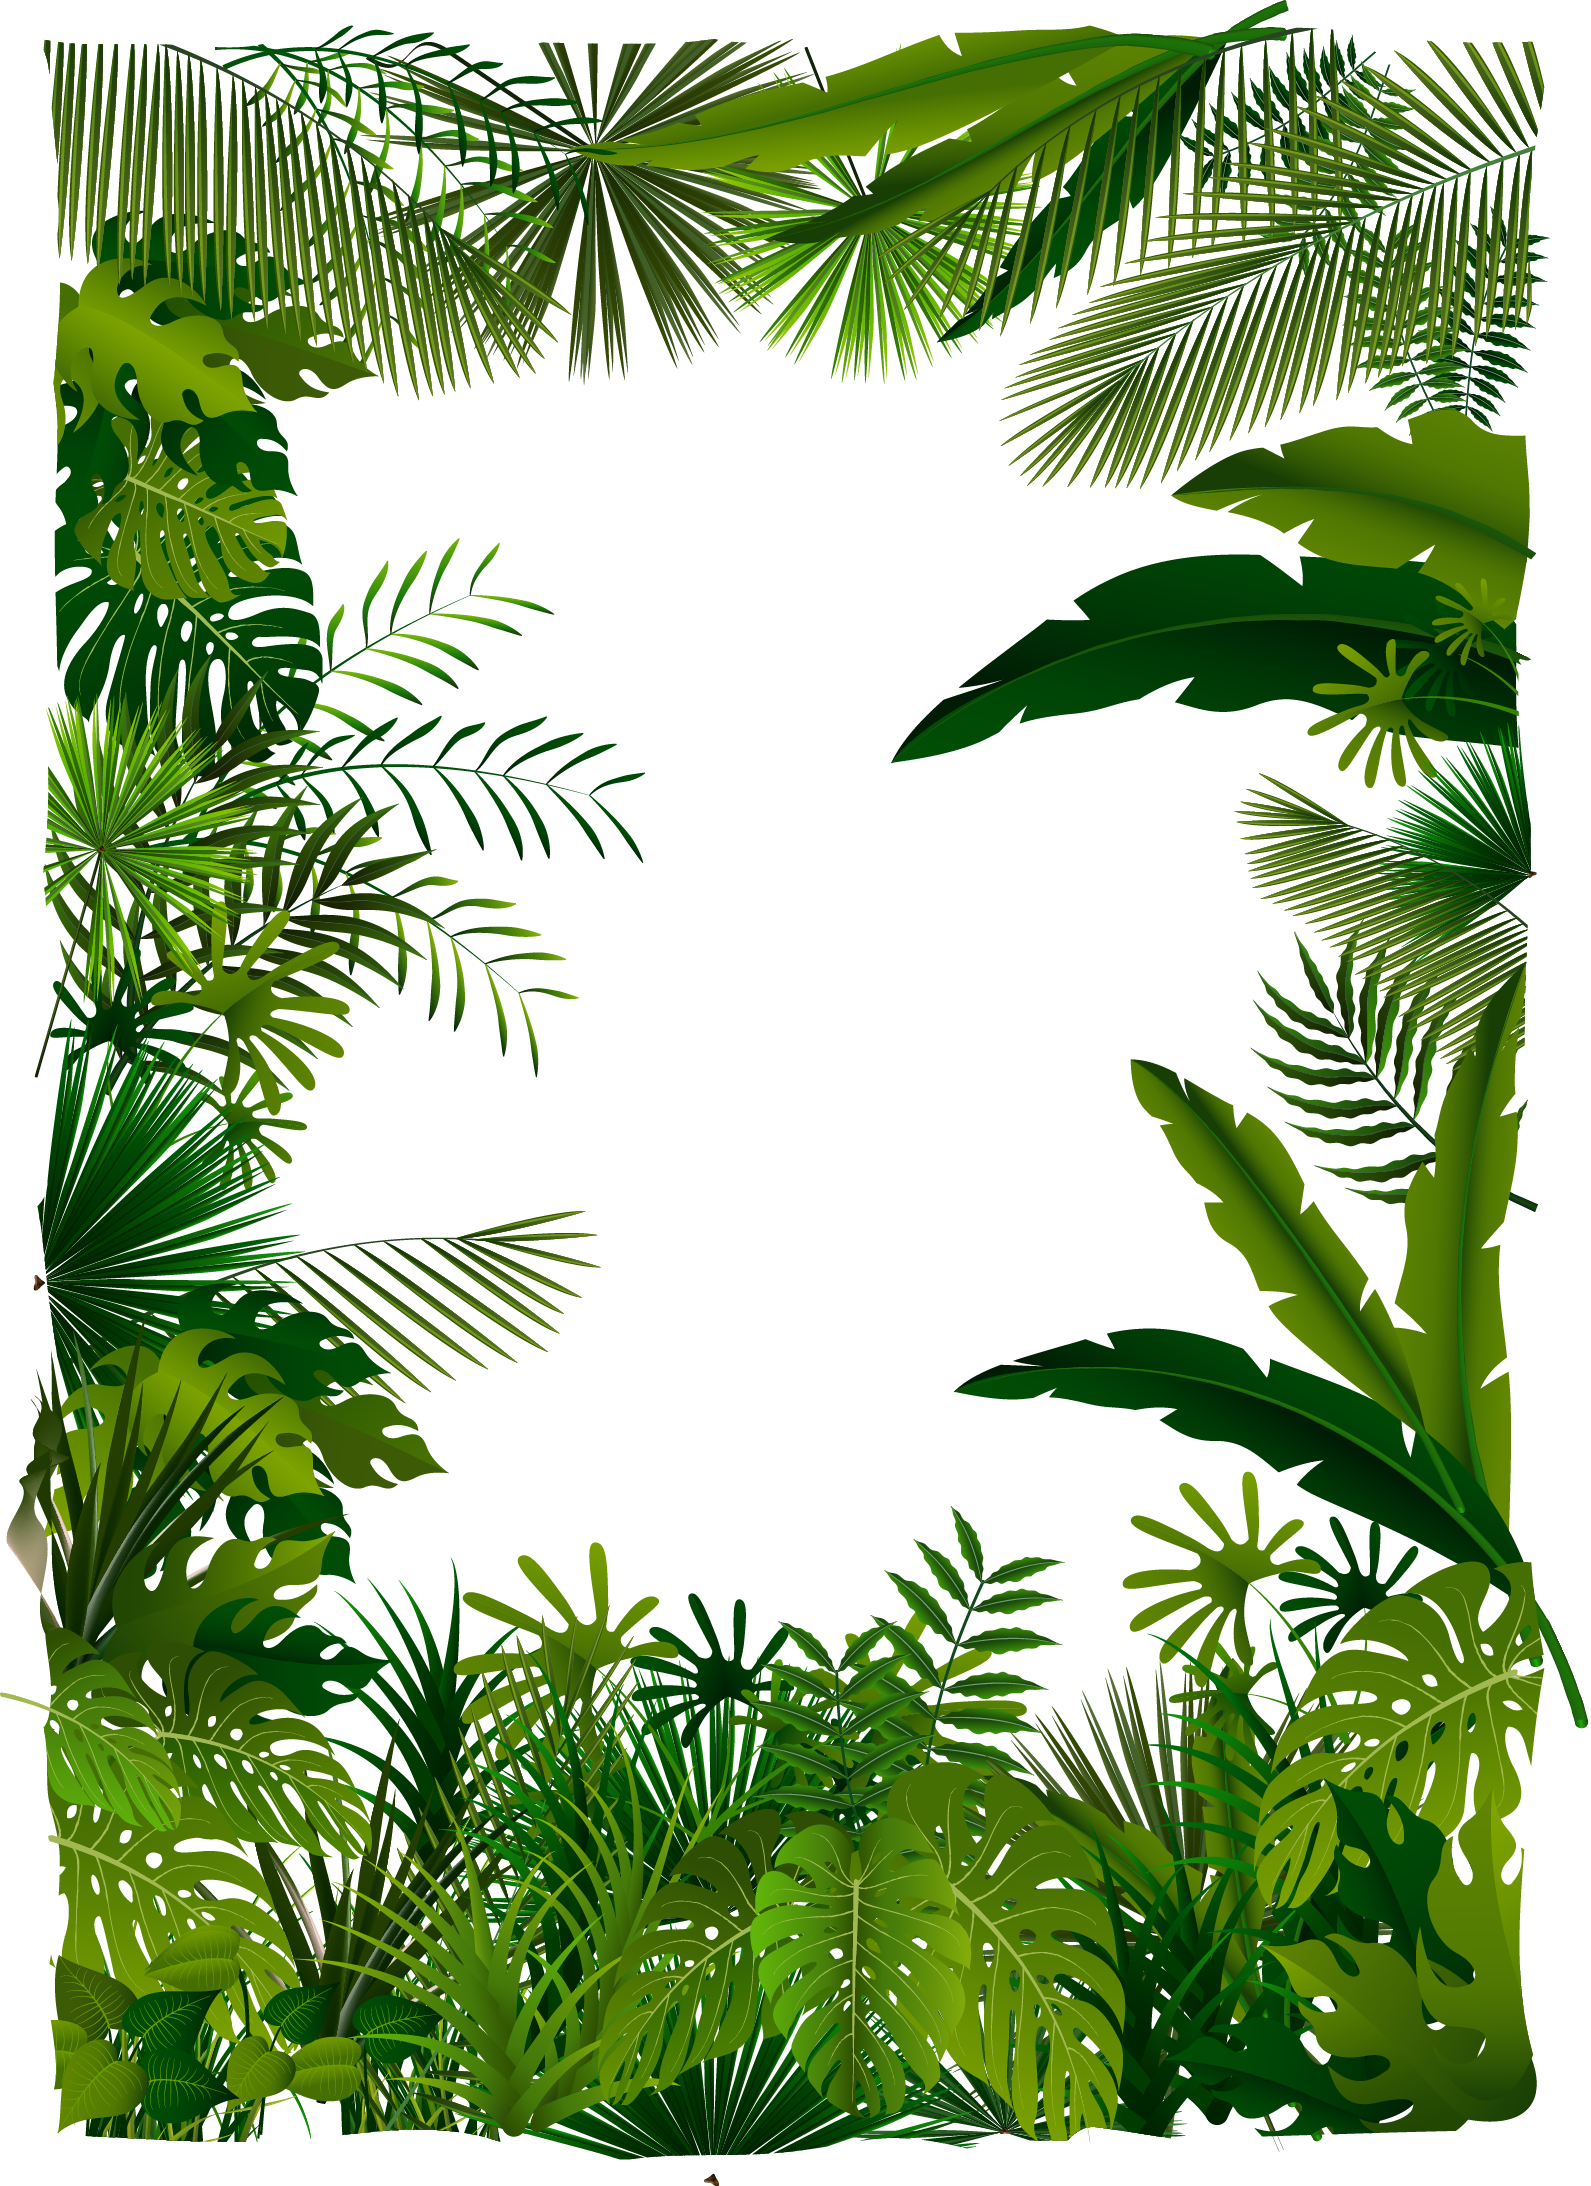 Trees Tree Illustration Tropical Euclidean Vector Forest Clipart